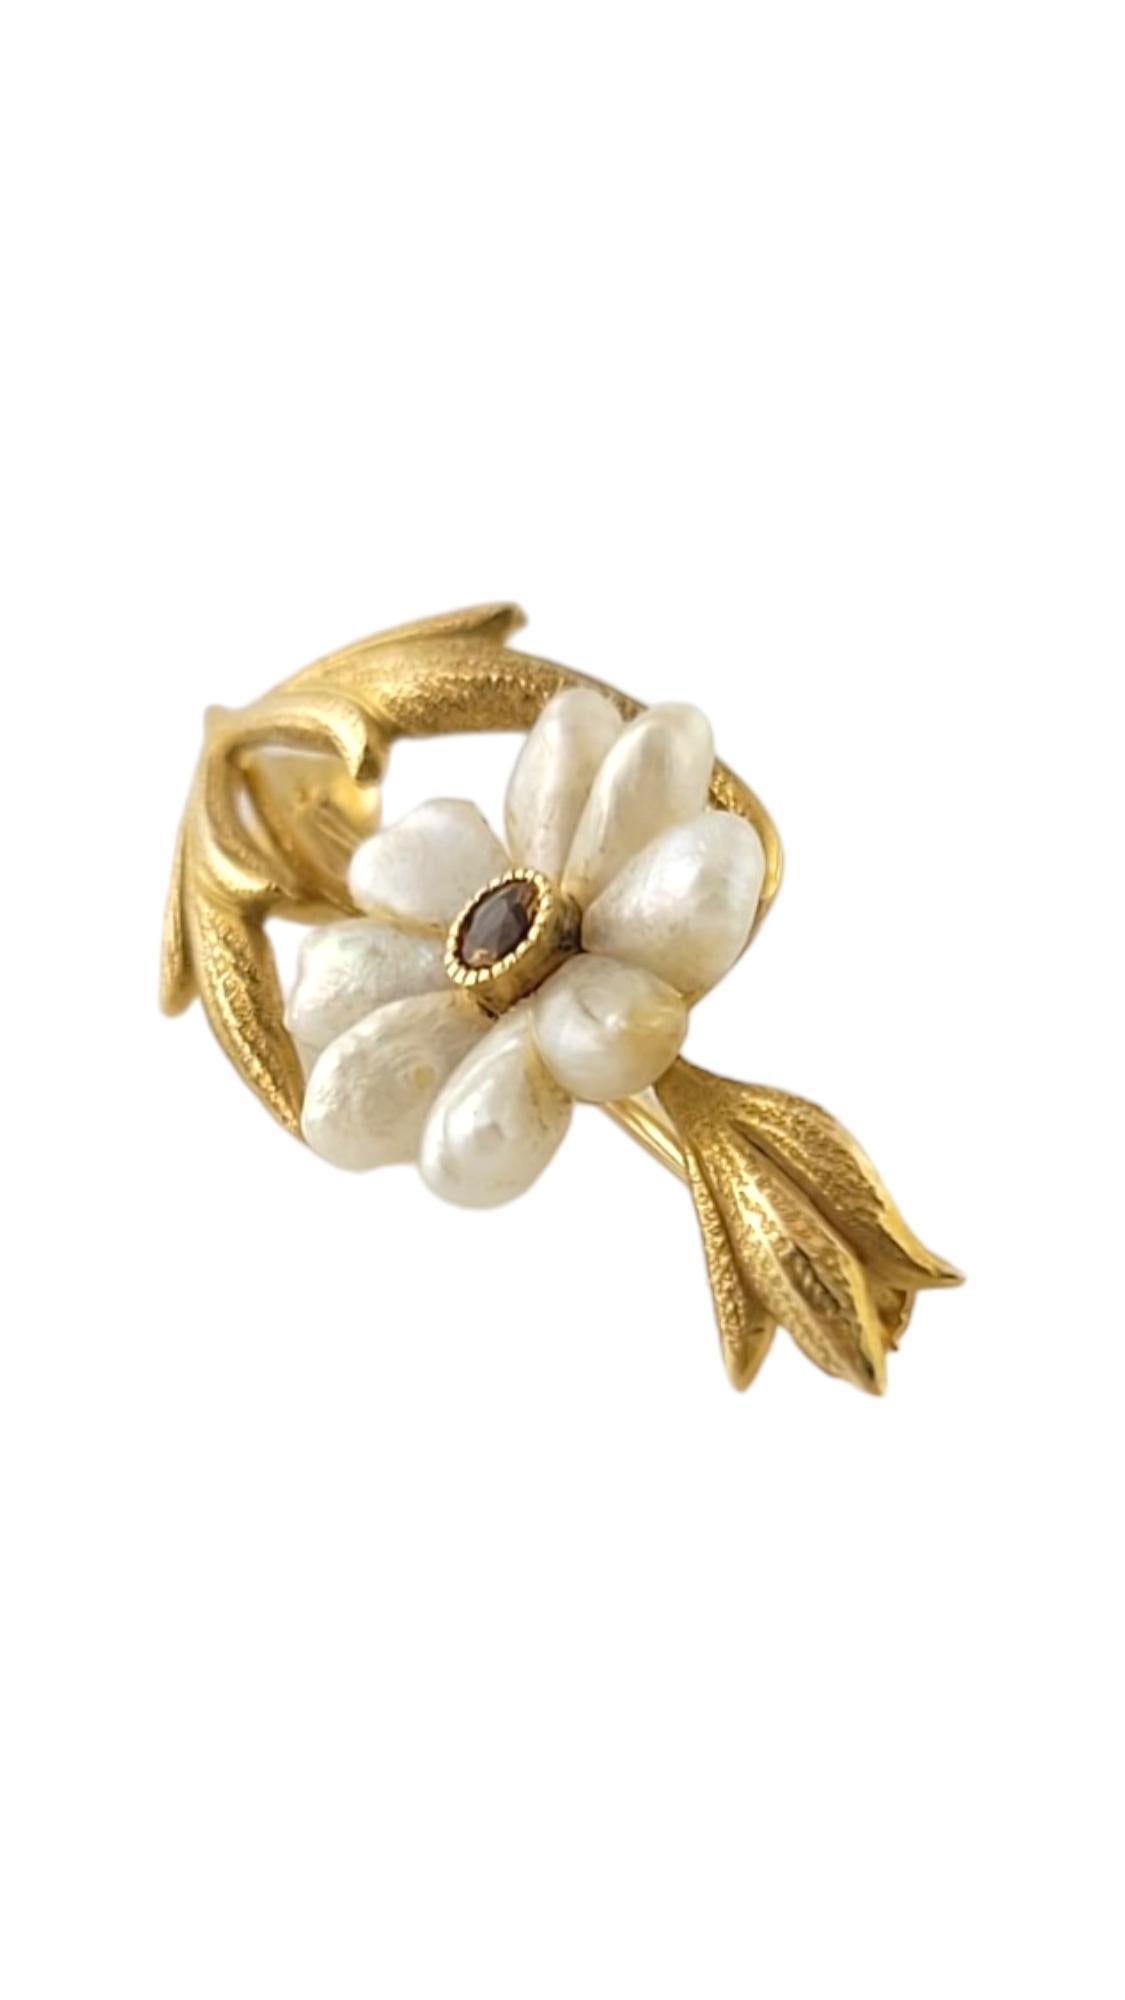 14K Yellow Gold Citrine & Baroque Keshi Pearl Flower Motif

This gorgeous brooch is crafted from 14K yellow gold and features 8 baroque keshi pearls with 1 citrine stone in the center to represent a beautiful flower!

Size: 34.5mm X 13.4mm X